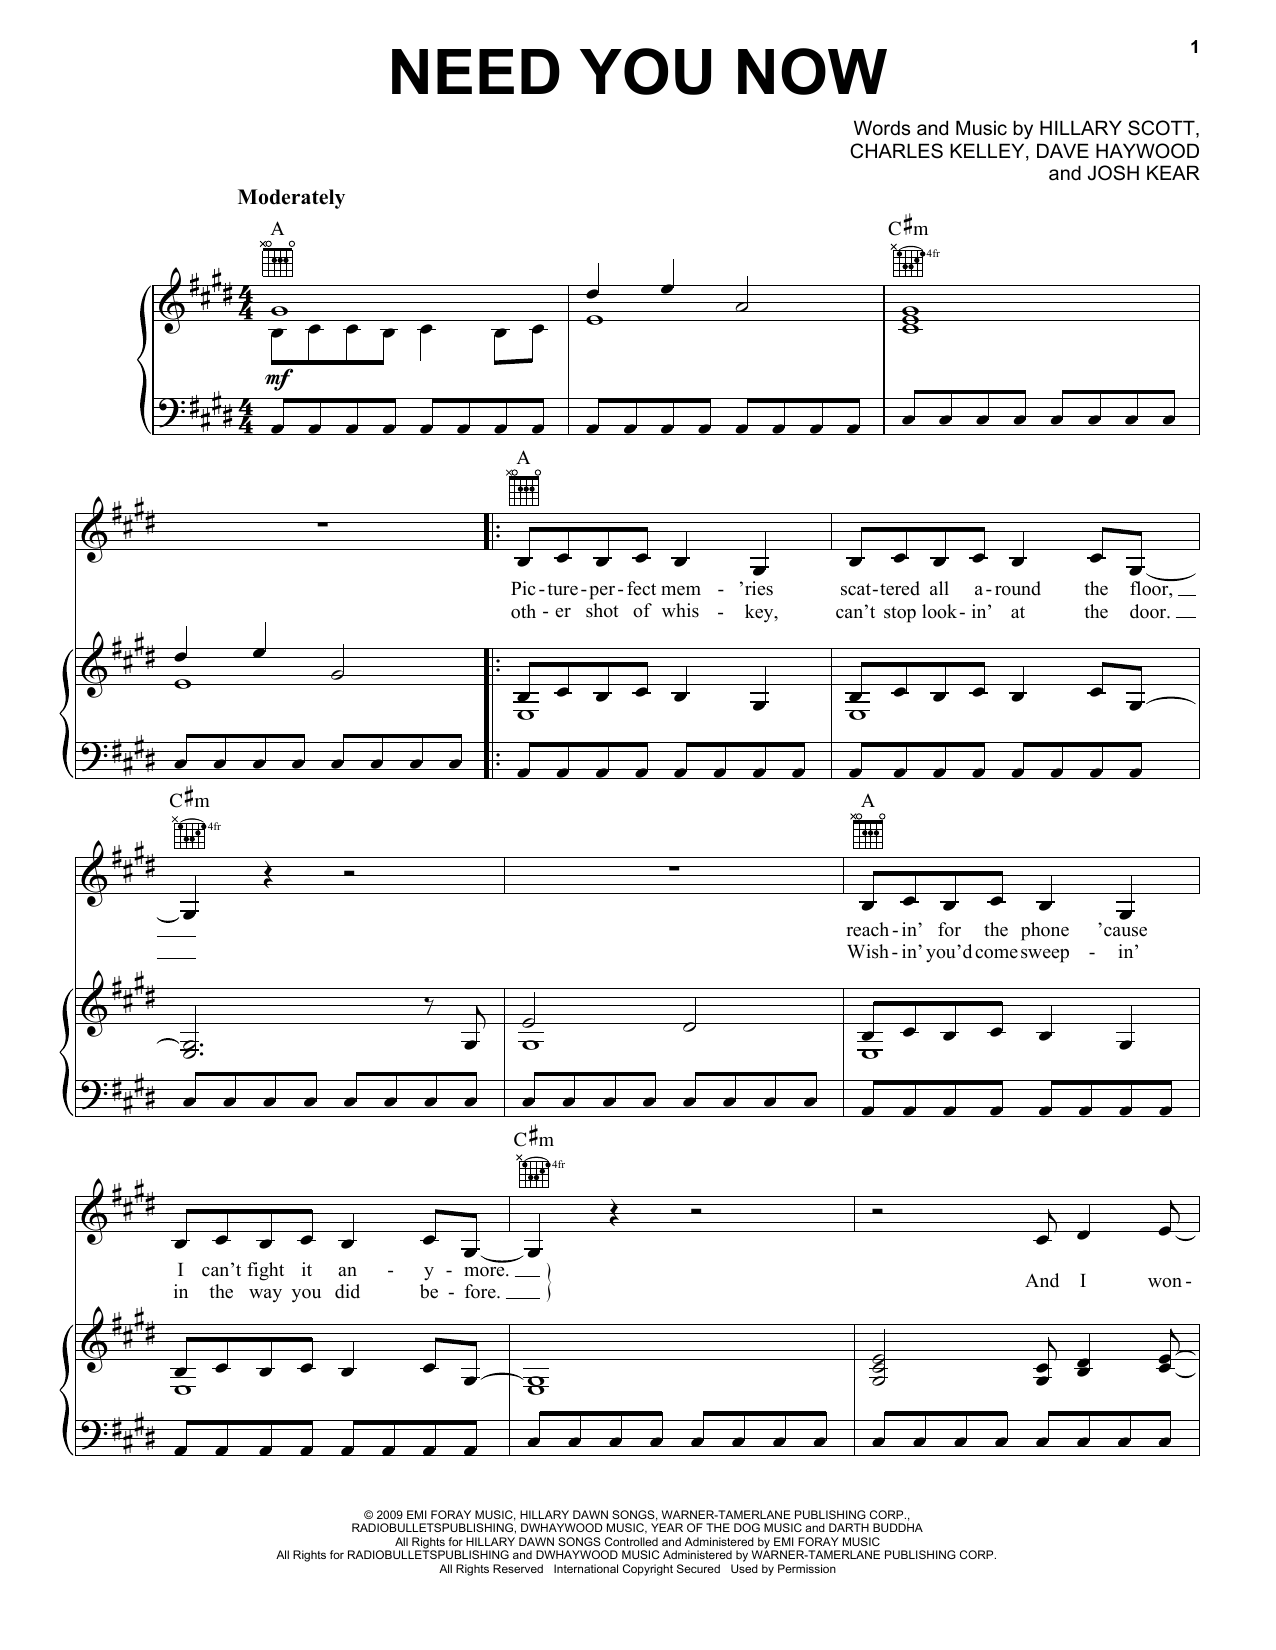 Download Lady A Need You Now Sheet Music